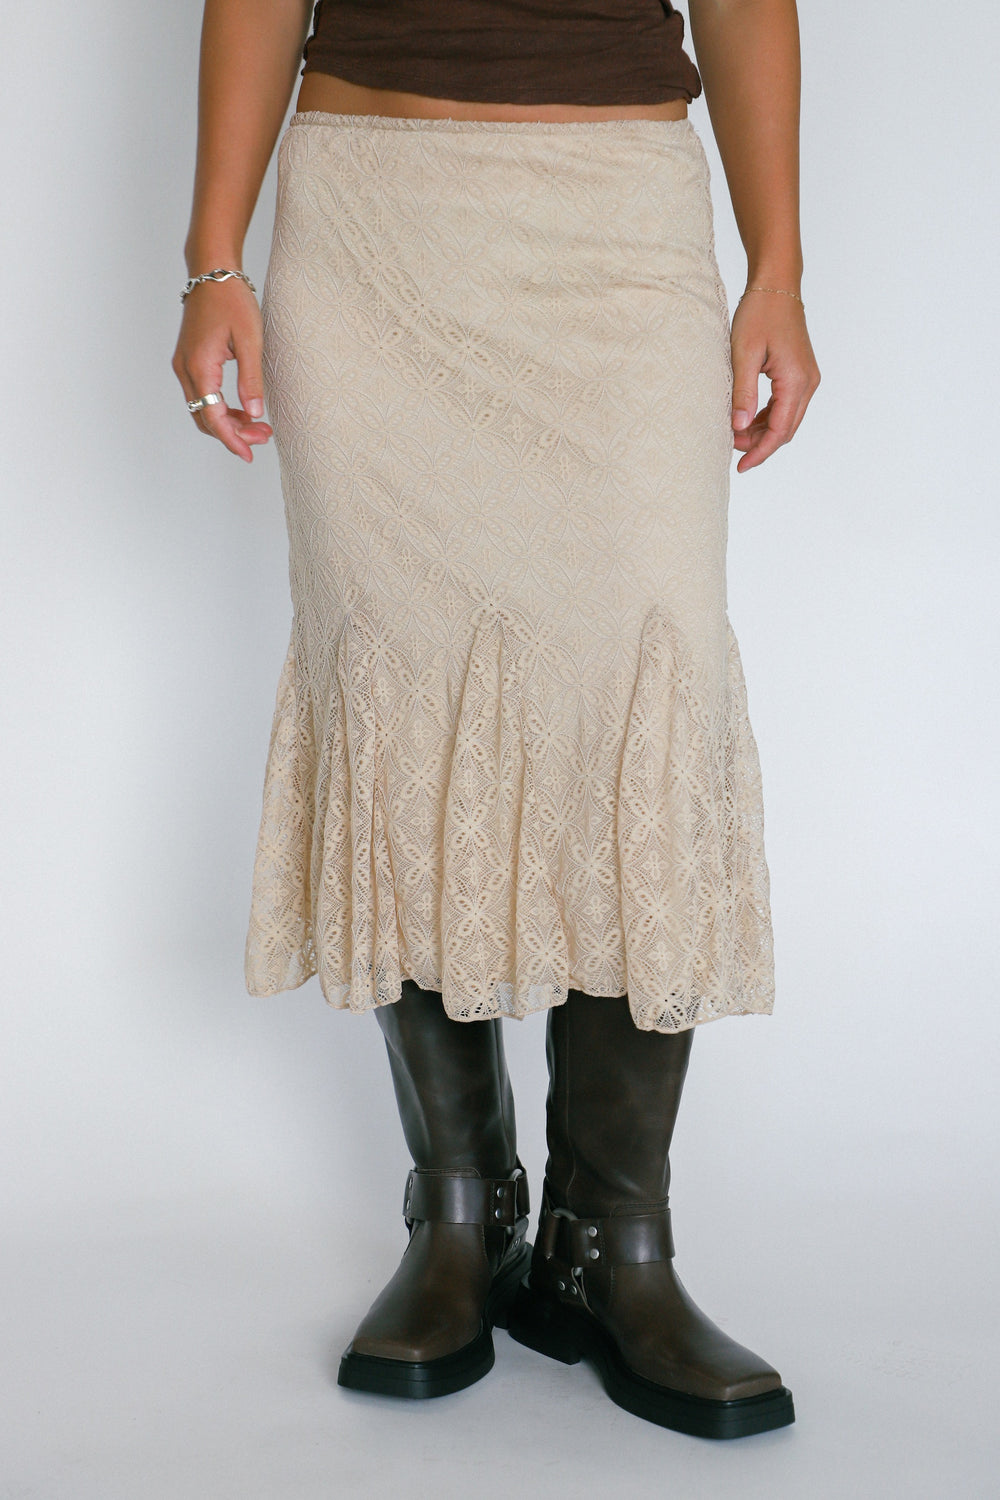 Nude Lace Betharia Skirt